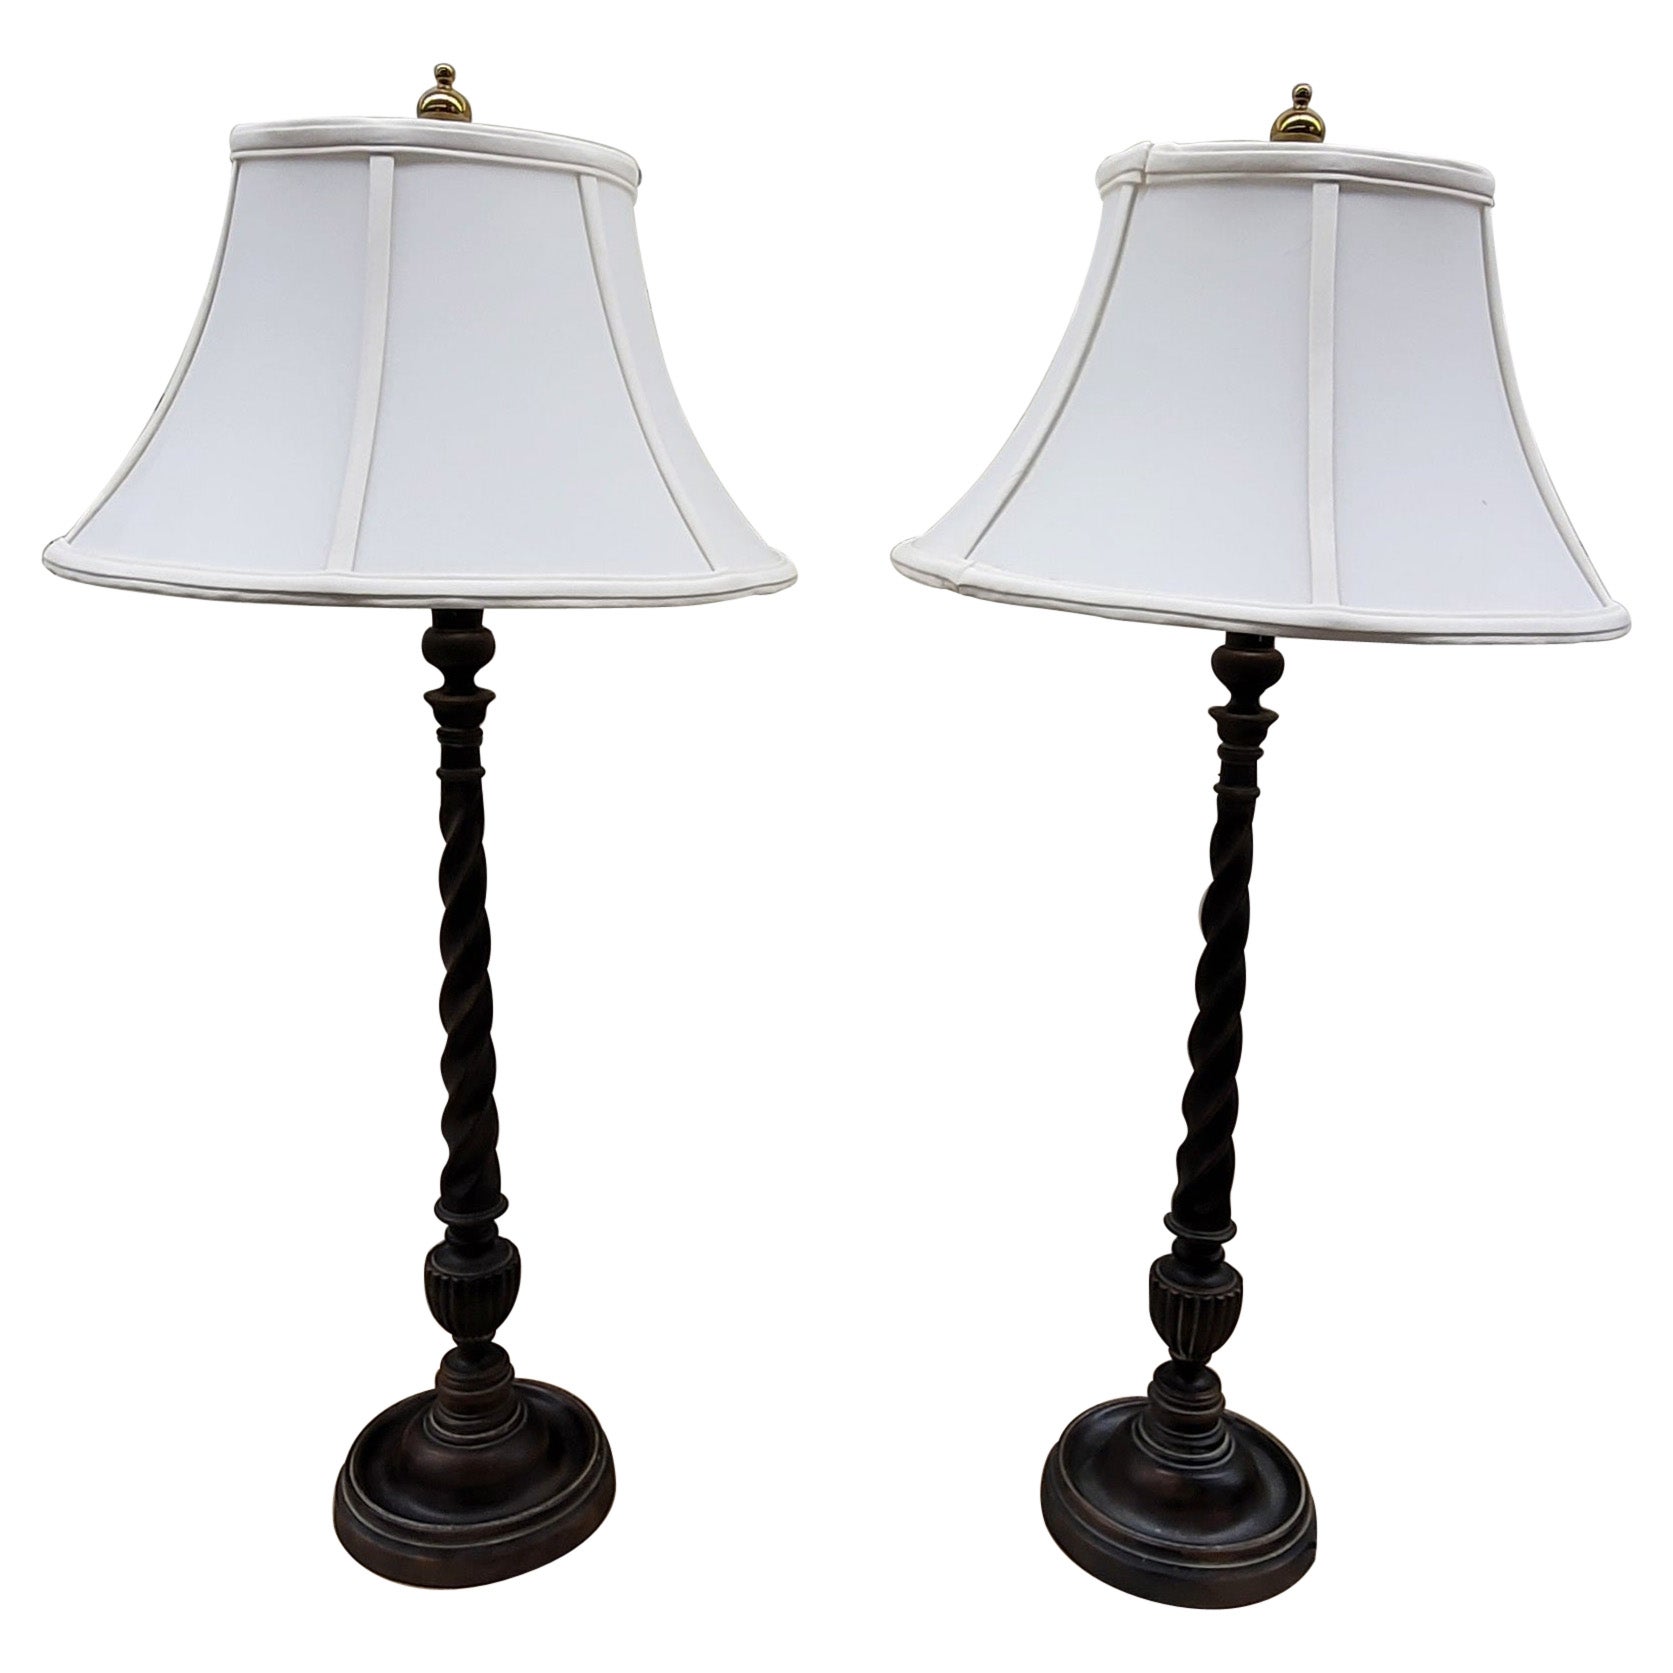 Pair of as You like It Barley Twist Wood Console or Credenza Table Lamps